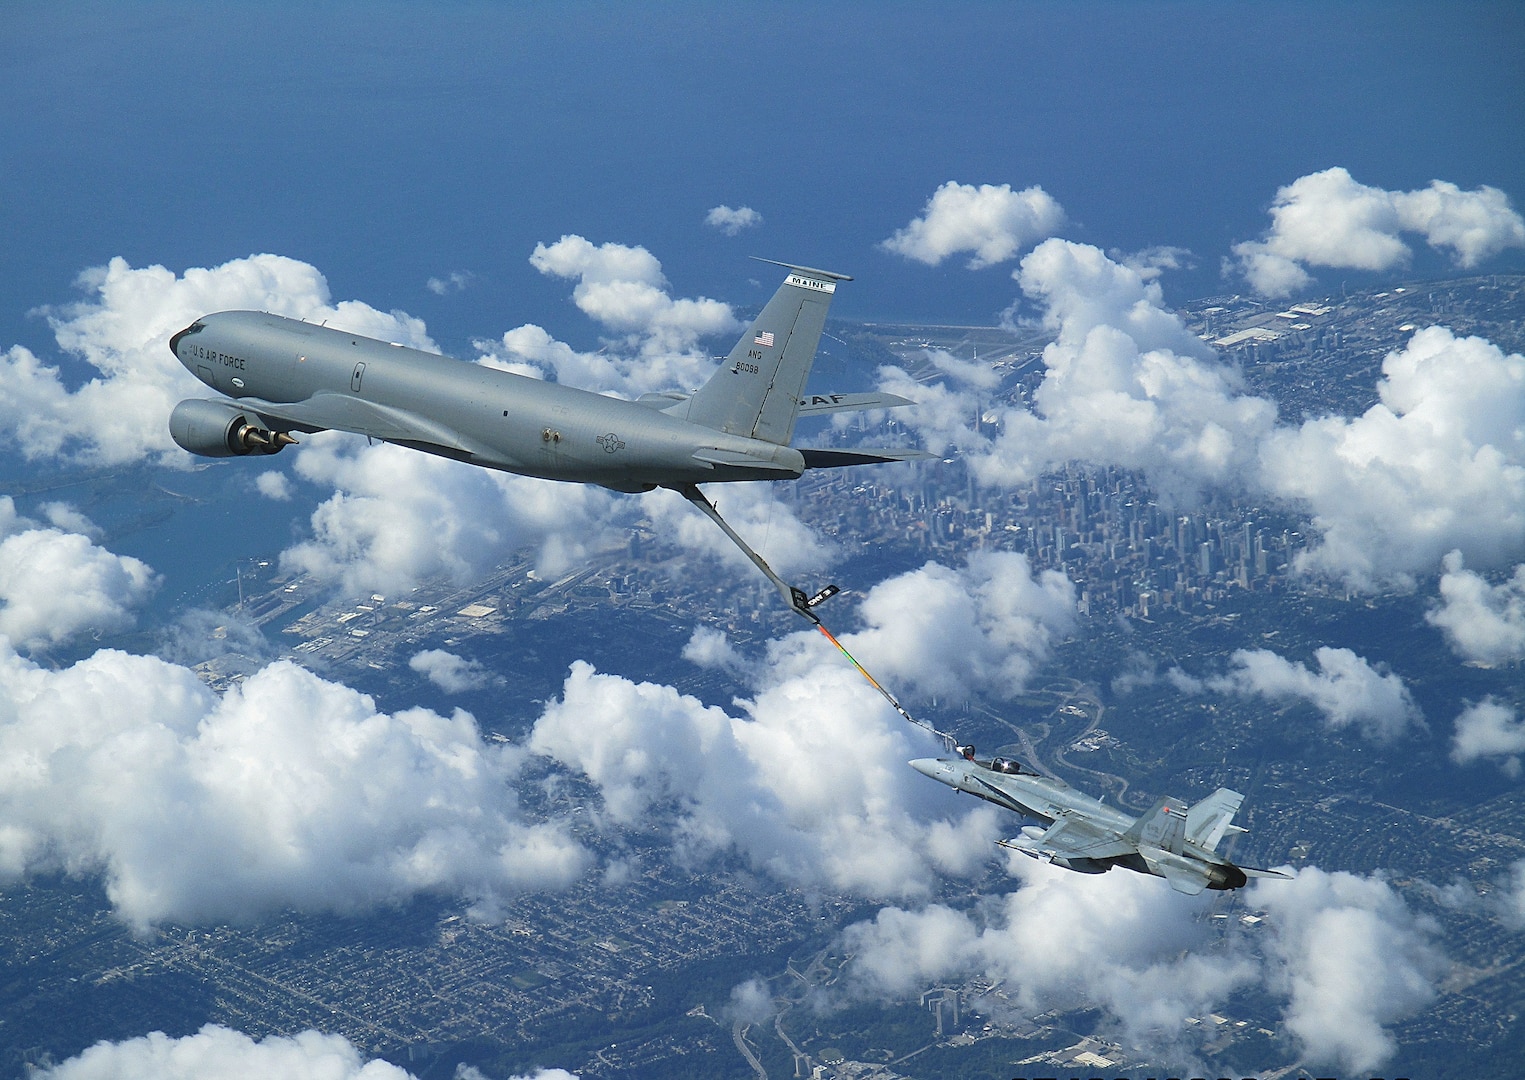 Royal Canadian Air Force CF-18 conducts air-to-air refuelling from a United States Air Force KC-135 tanker during the binational NORAD air defence exercise over the Greater Toronto Area on July 30, 2020. (Photo courtesy of CANR Public Affairs)